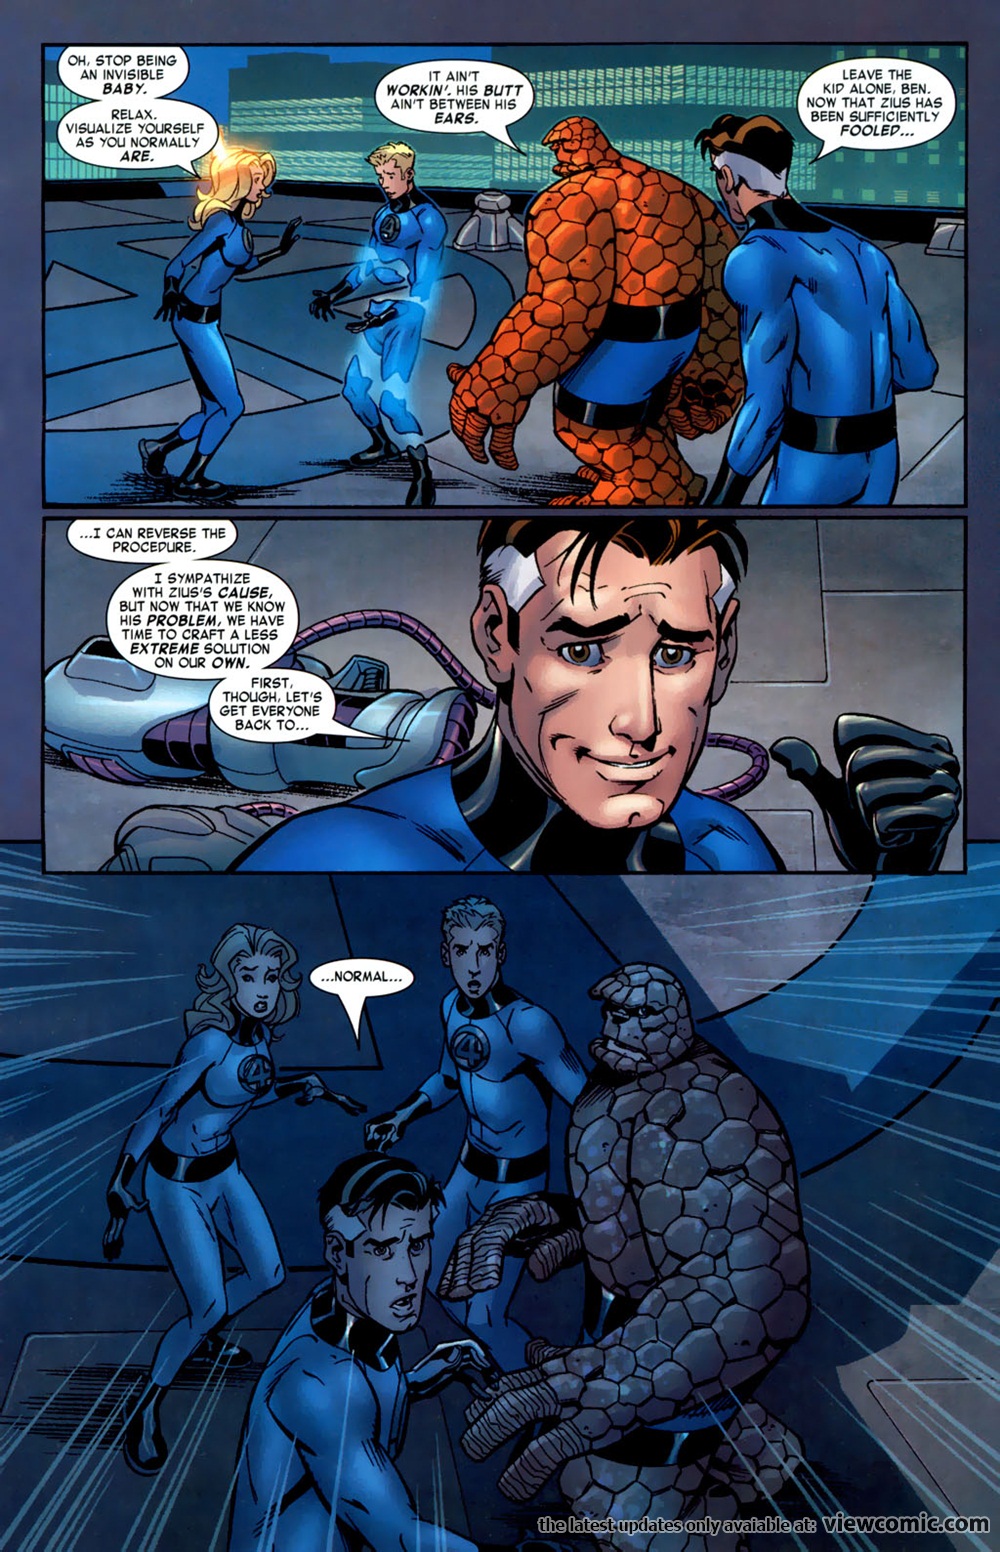 Fantastic Four Porn Extreme - Avengers Disassembled 033 Fantastic Four 519 | Read Avengers Disassembled  033 Fantastic Four 519 comic online in high quality. Read Full Comic online  for free - Read comics online in high quality .